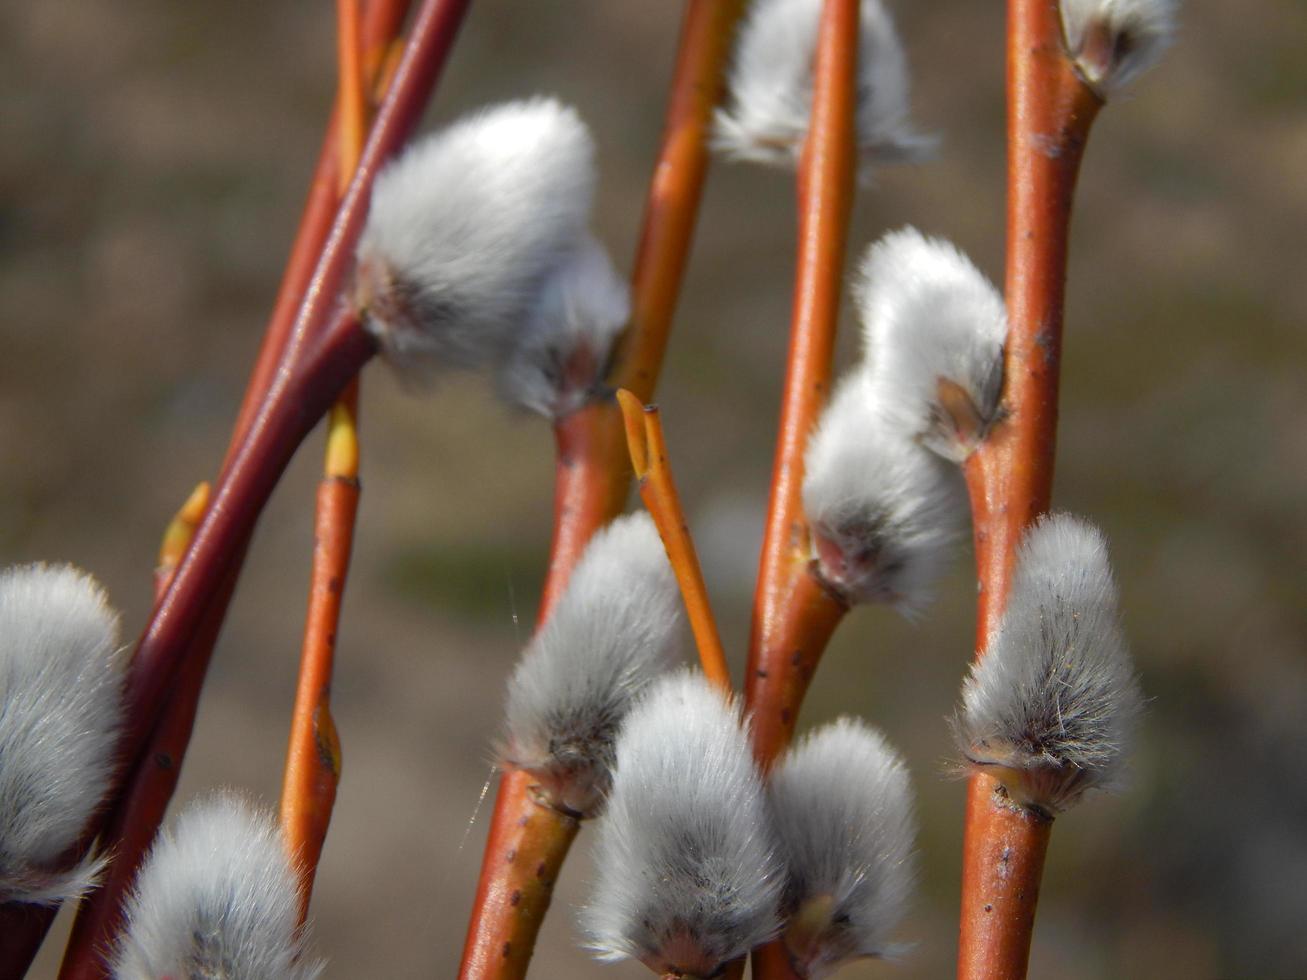 Pussy willow branches with background on the branches of trees in spring blossom photo